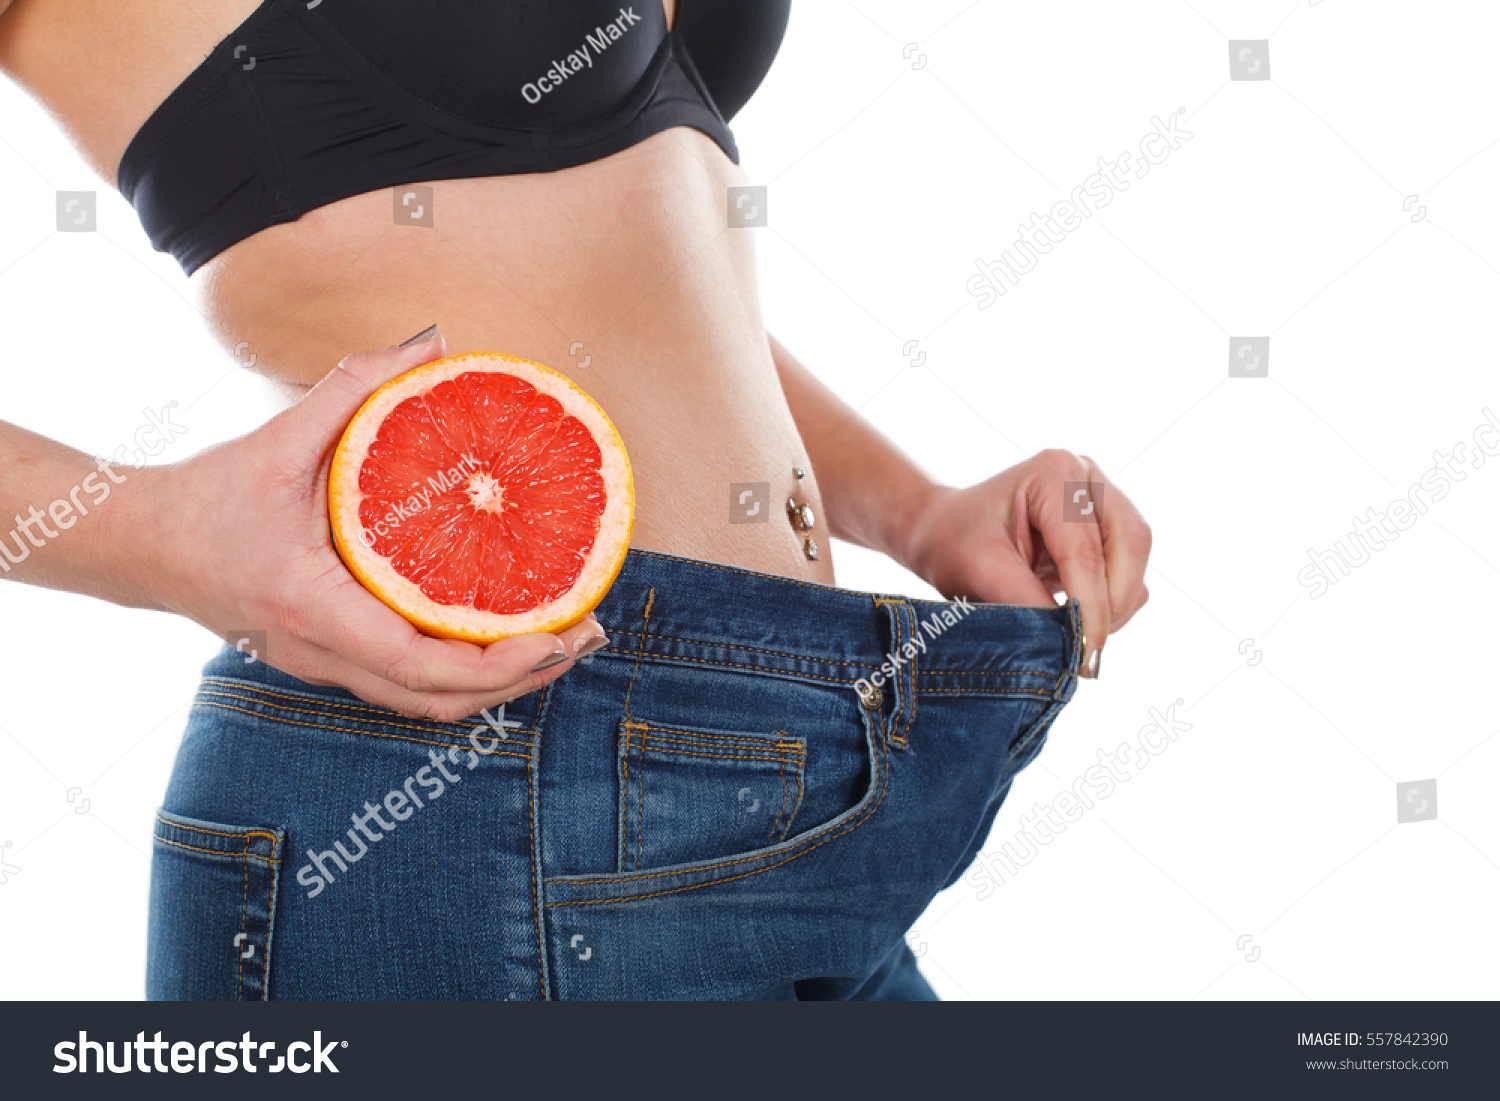 Close up picture of woman's weightloss with grapefruit diet #557842390